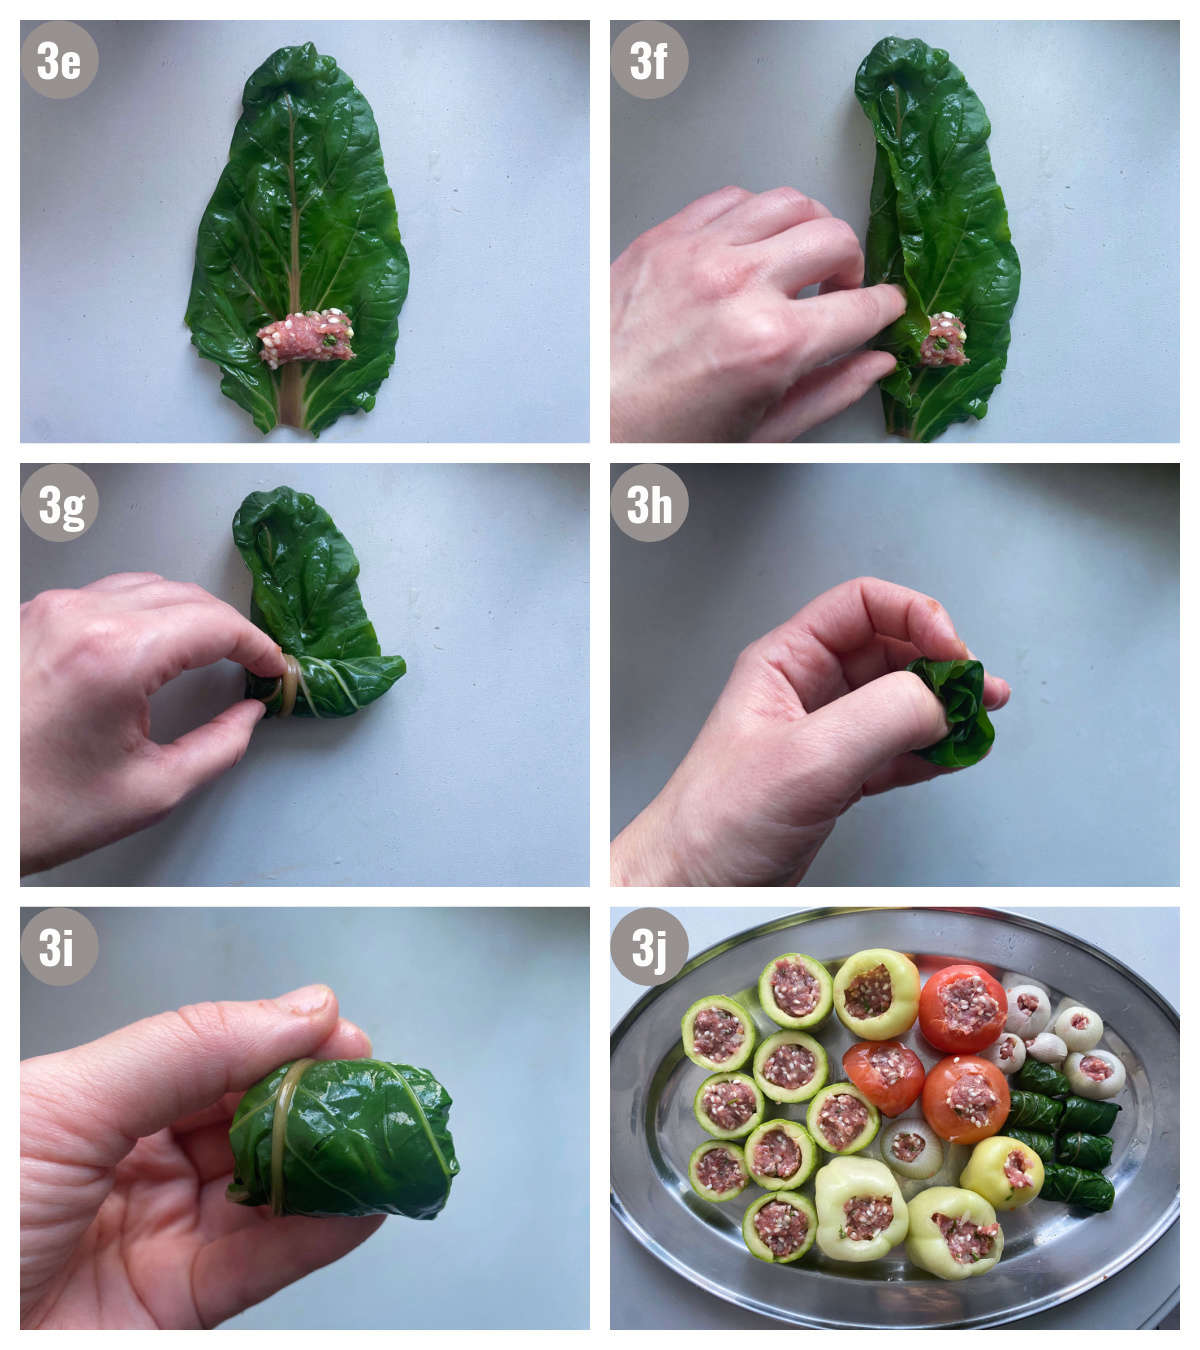 Six photographs, two by three, of collard green leaf being stuffed, first photo is with meat, second is with left side lifted over the meat, third photo is of it being rolled, fourth photograph is of it being closed on one side, on fifth photograph a hand is holding it in air, and sixth photograph shows all vegetables, stuffed, on a big oval tray on a gray background. 